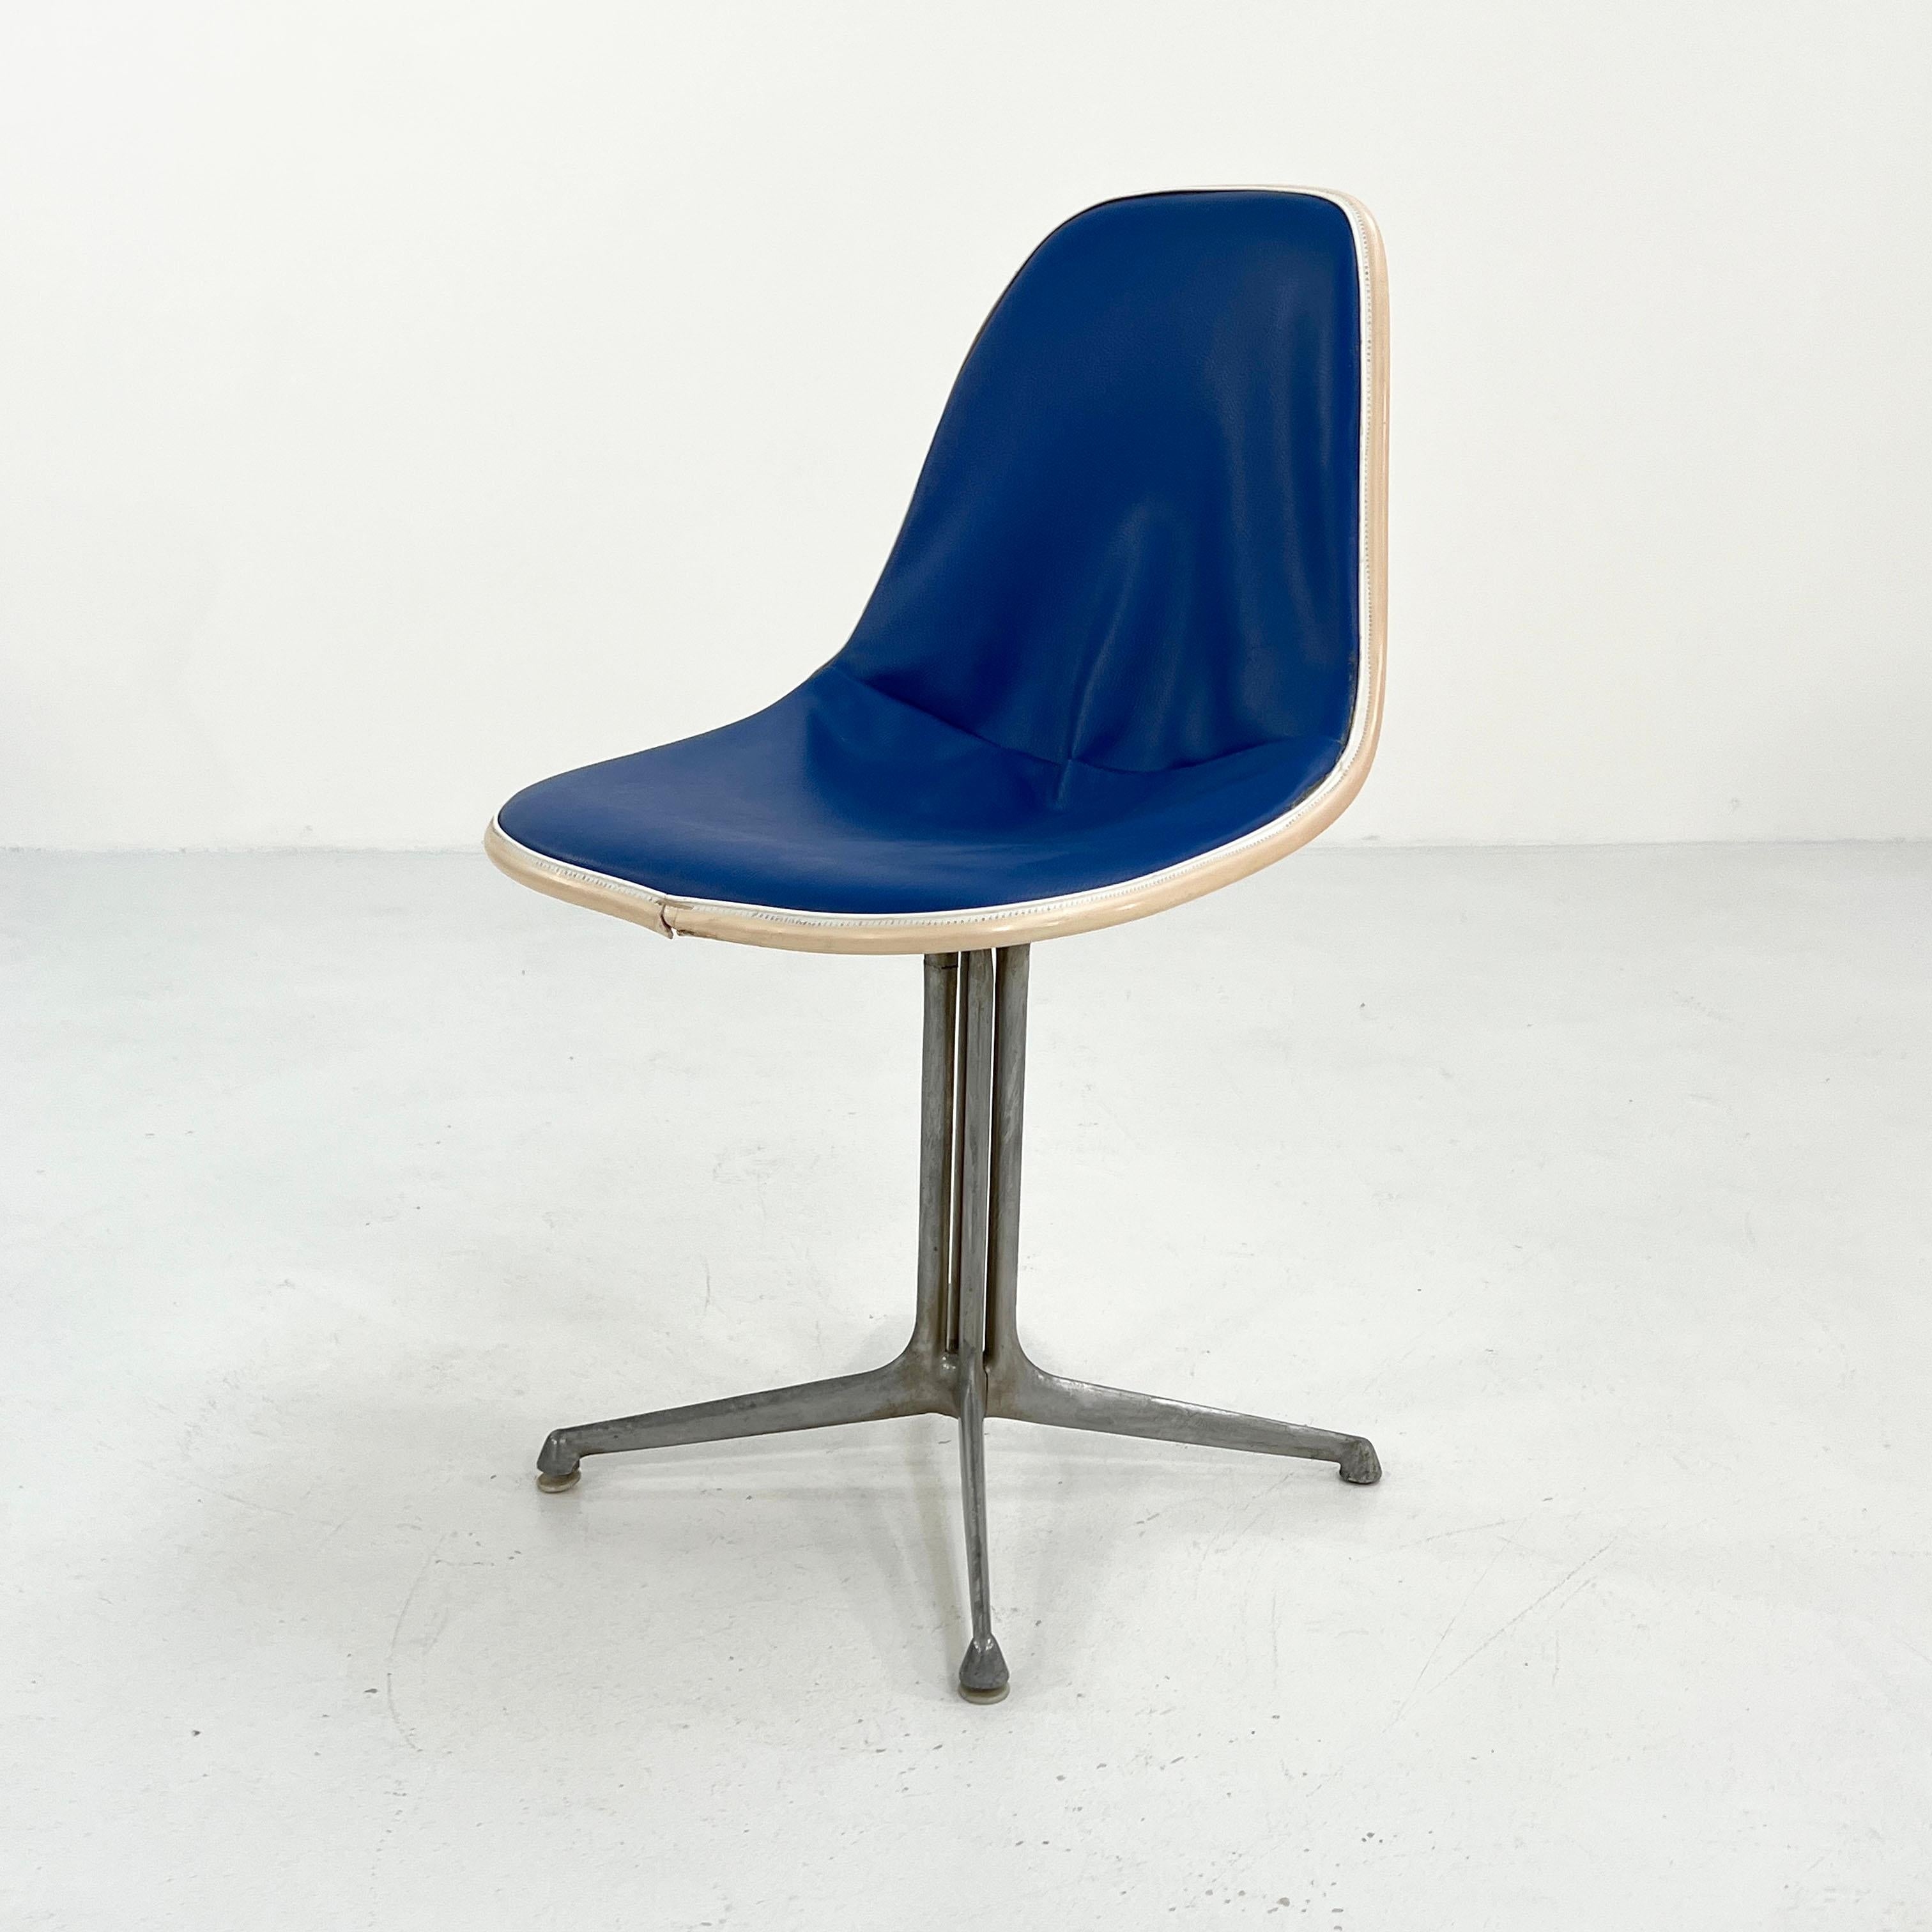 Designer - Charles and Ray Eames
Producer - Herman Miller
Model - La Fonda Dining Chairs
Design Period - Sixties
Measurements - Width 47 cm x Depth 46 cm x Height 84 cm x Seat Height 45 cm
Materials - Fiberglass, metal, leatherette 
Color -